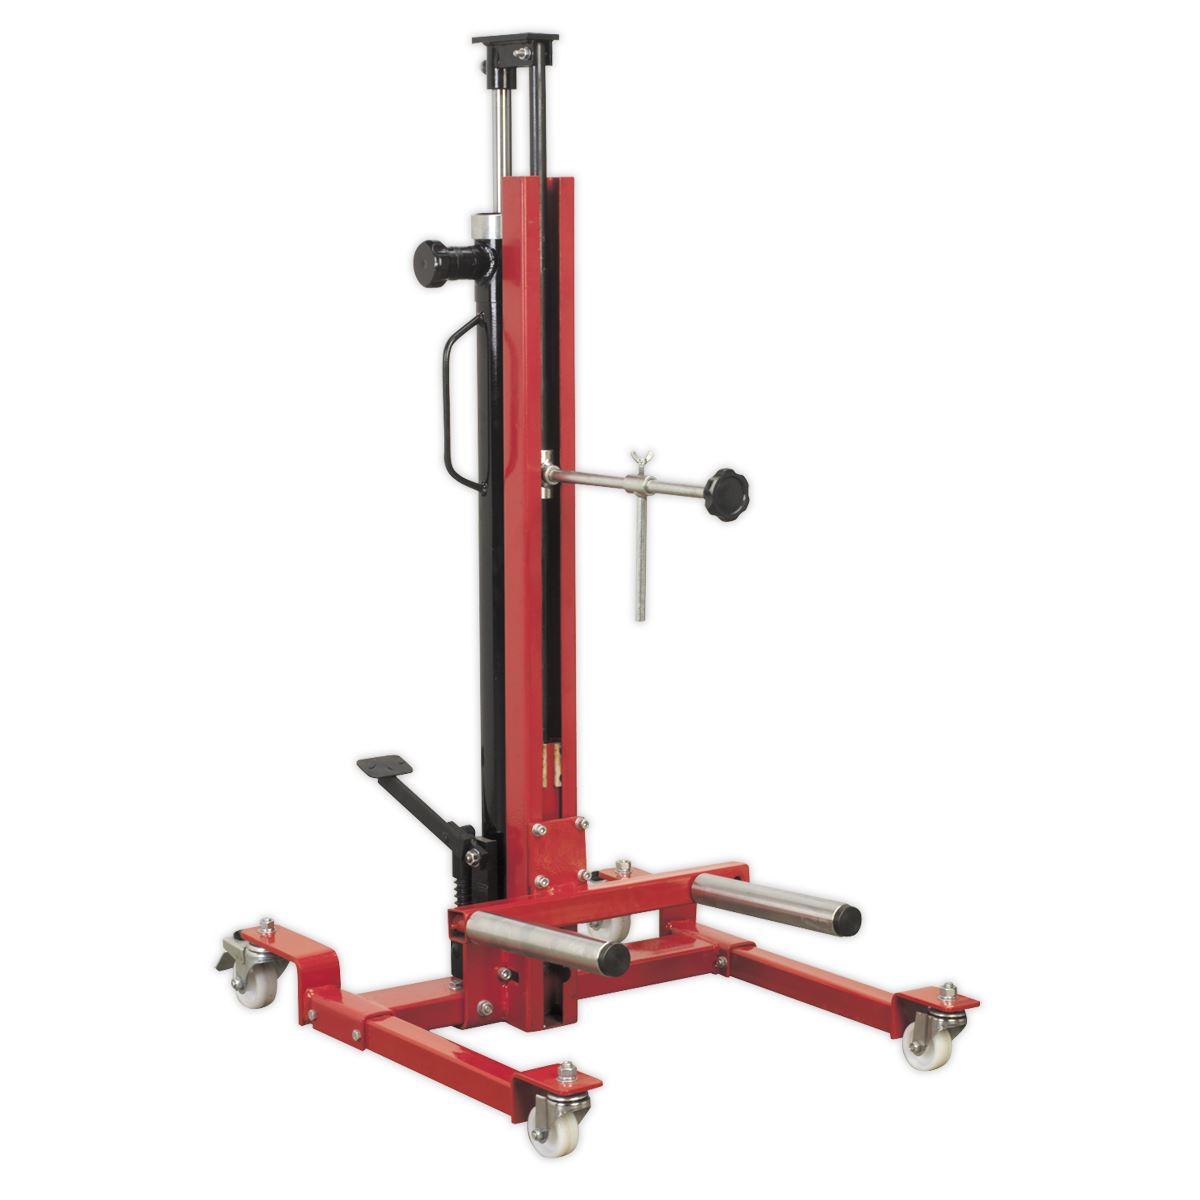 Sealey Wheel Removal/Lifter Trolley 80kg Quick Lift